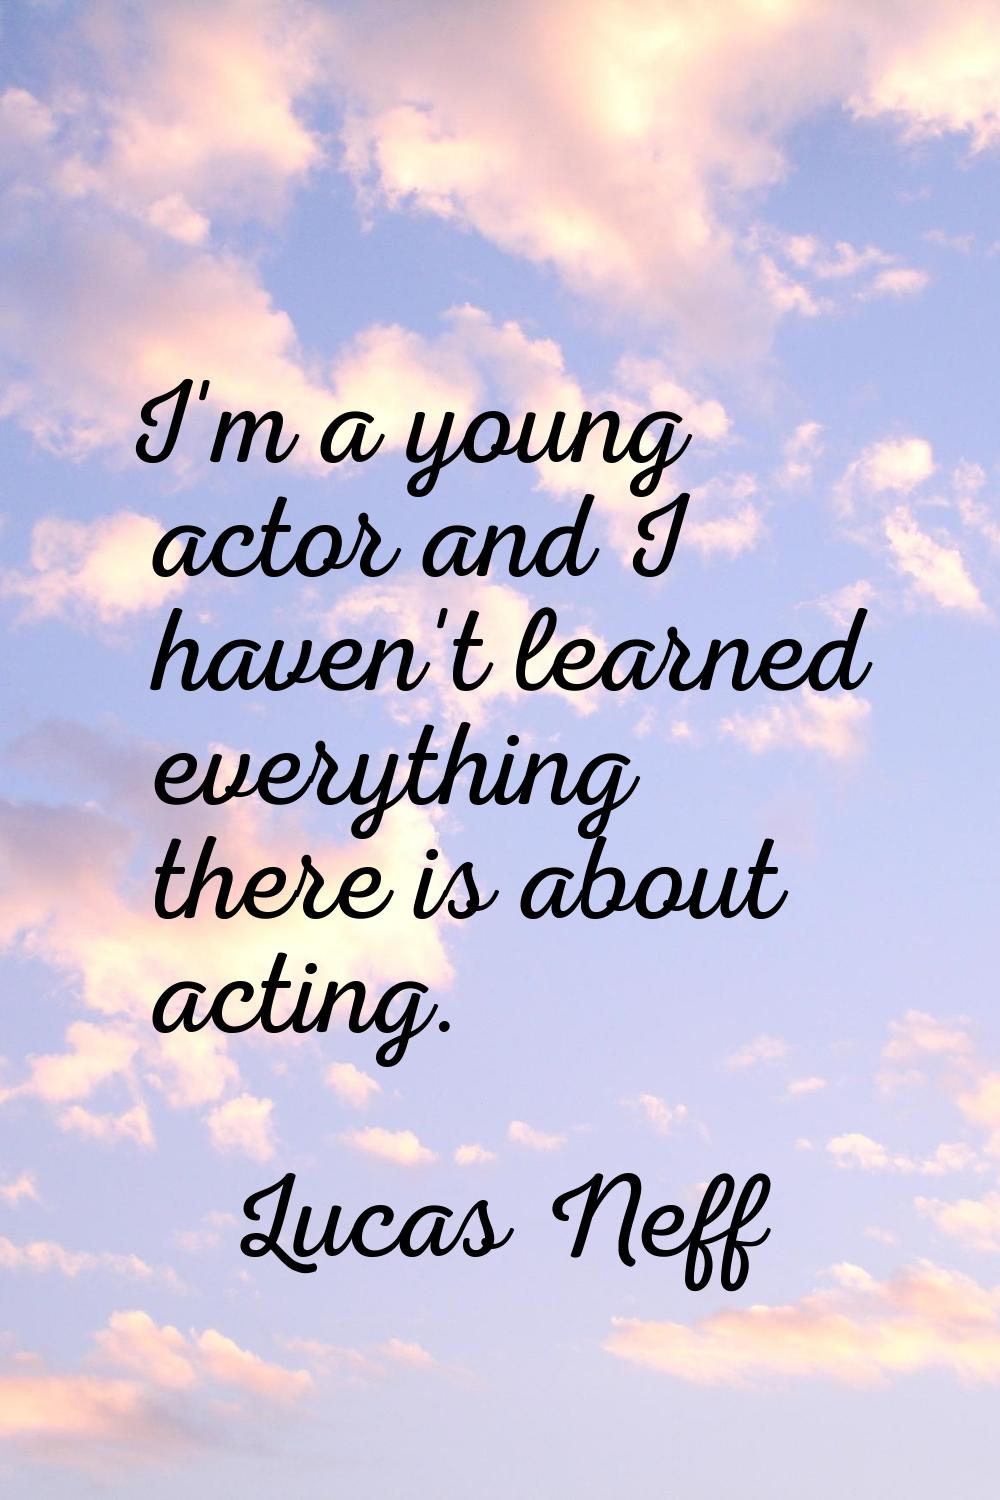 I'm a young actor and I haven't learned everything there is about acting.